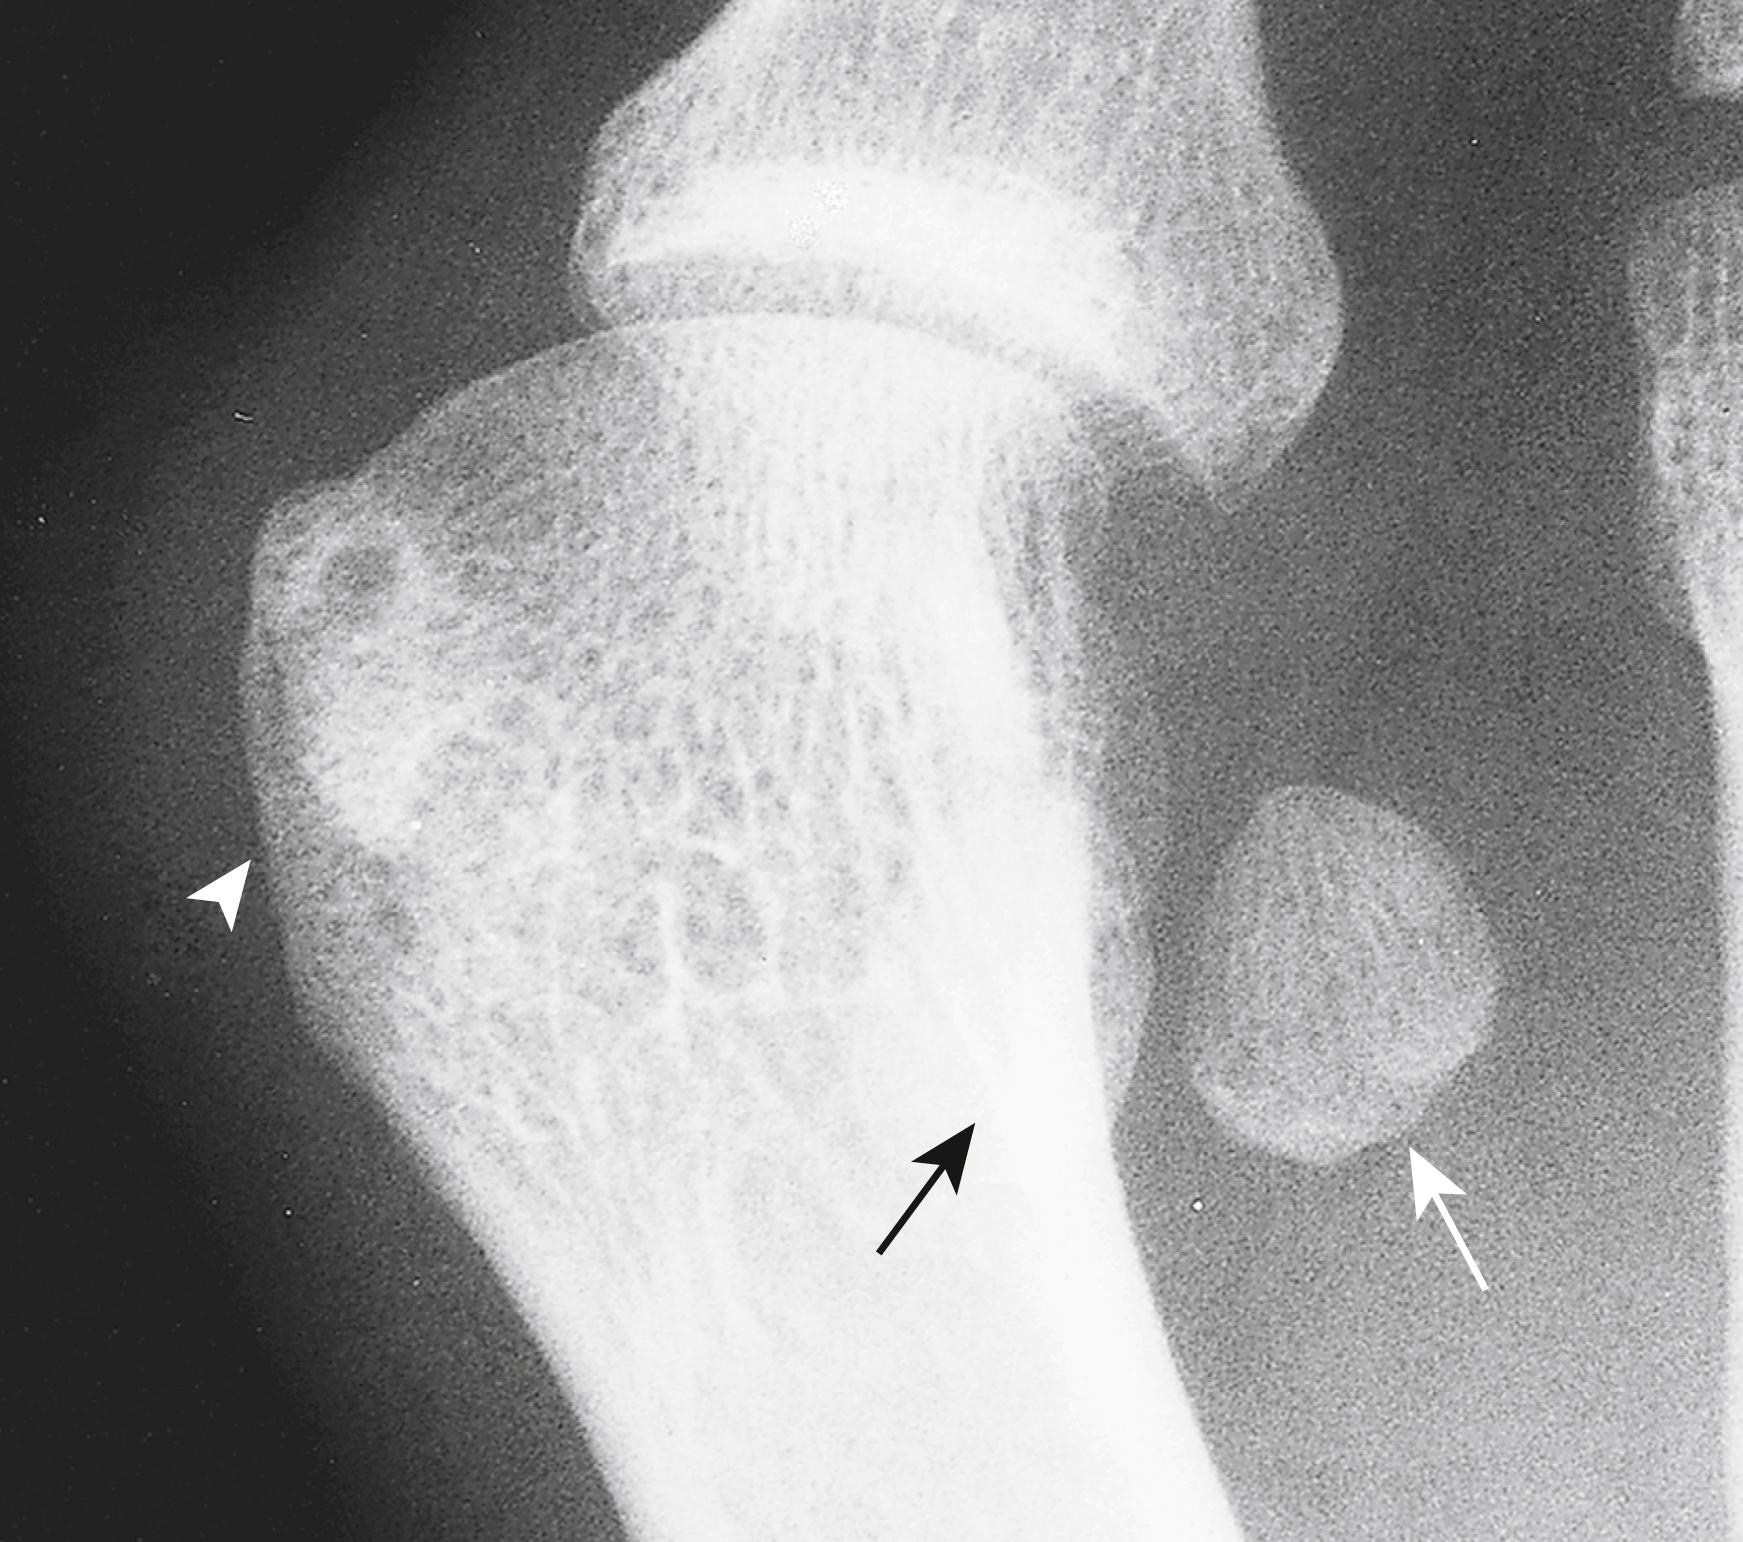 FIG. 193.2, Hallux valgus. Abnormalities consist of soft-tissue swelling, lateral displacement and rotation of the proximal phalanx and sesamoids (arrows) , and bony hypertrophy (arrowhead) on the medial aspect of the metatarsal bone.